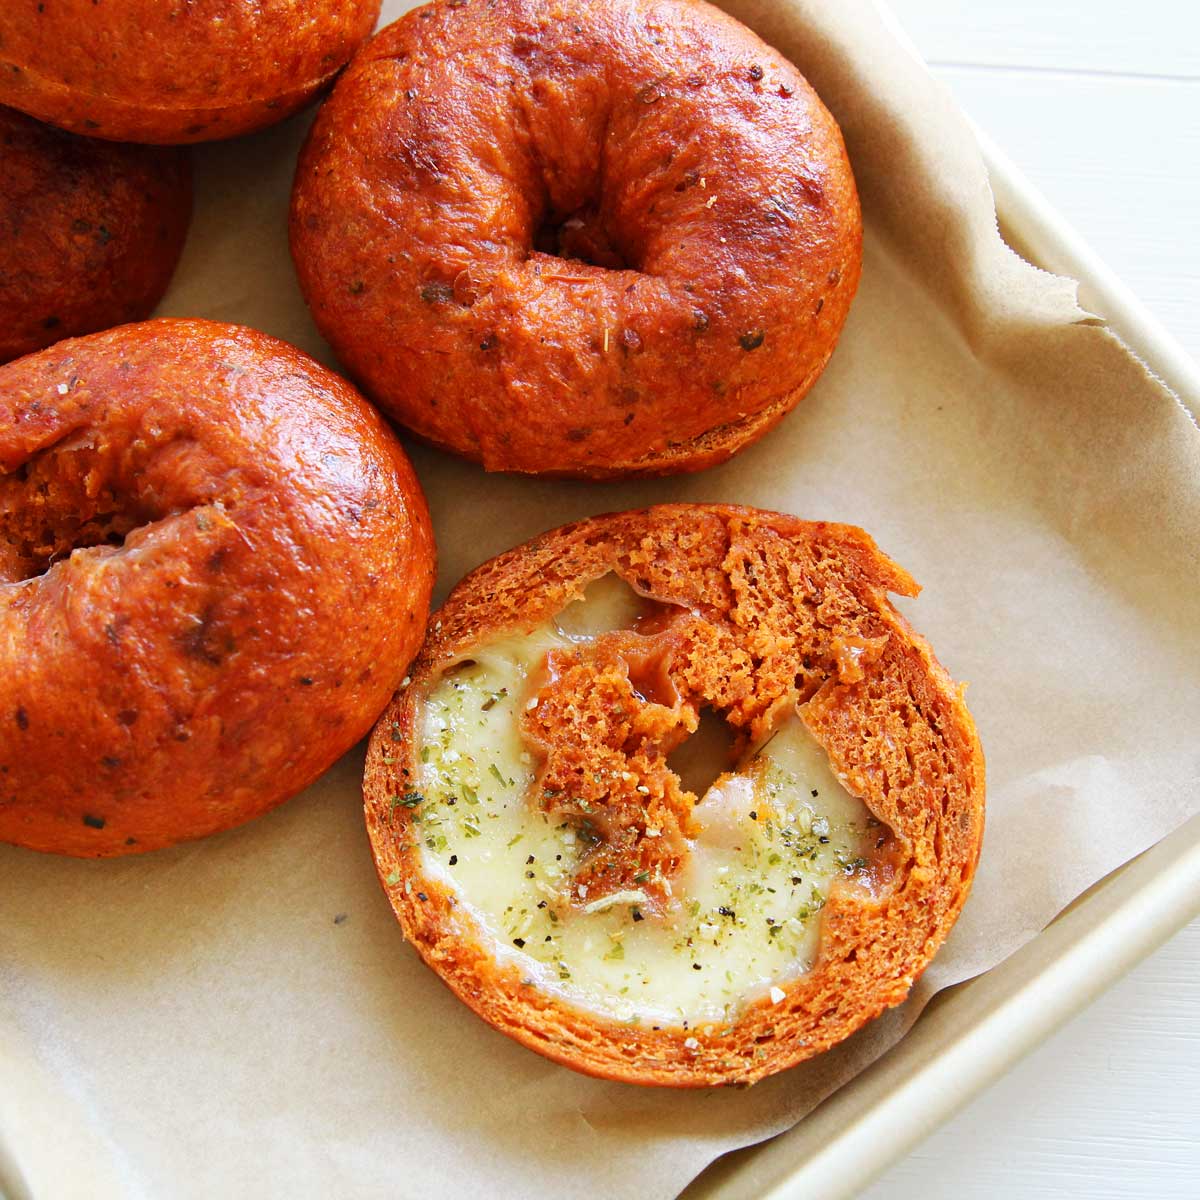 Game-changing Pizza Bagels! Overnight Tomato Bagels Stuffed With Cheese - Roasted Corn Naan